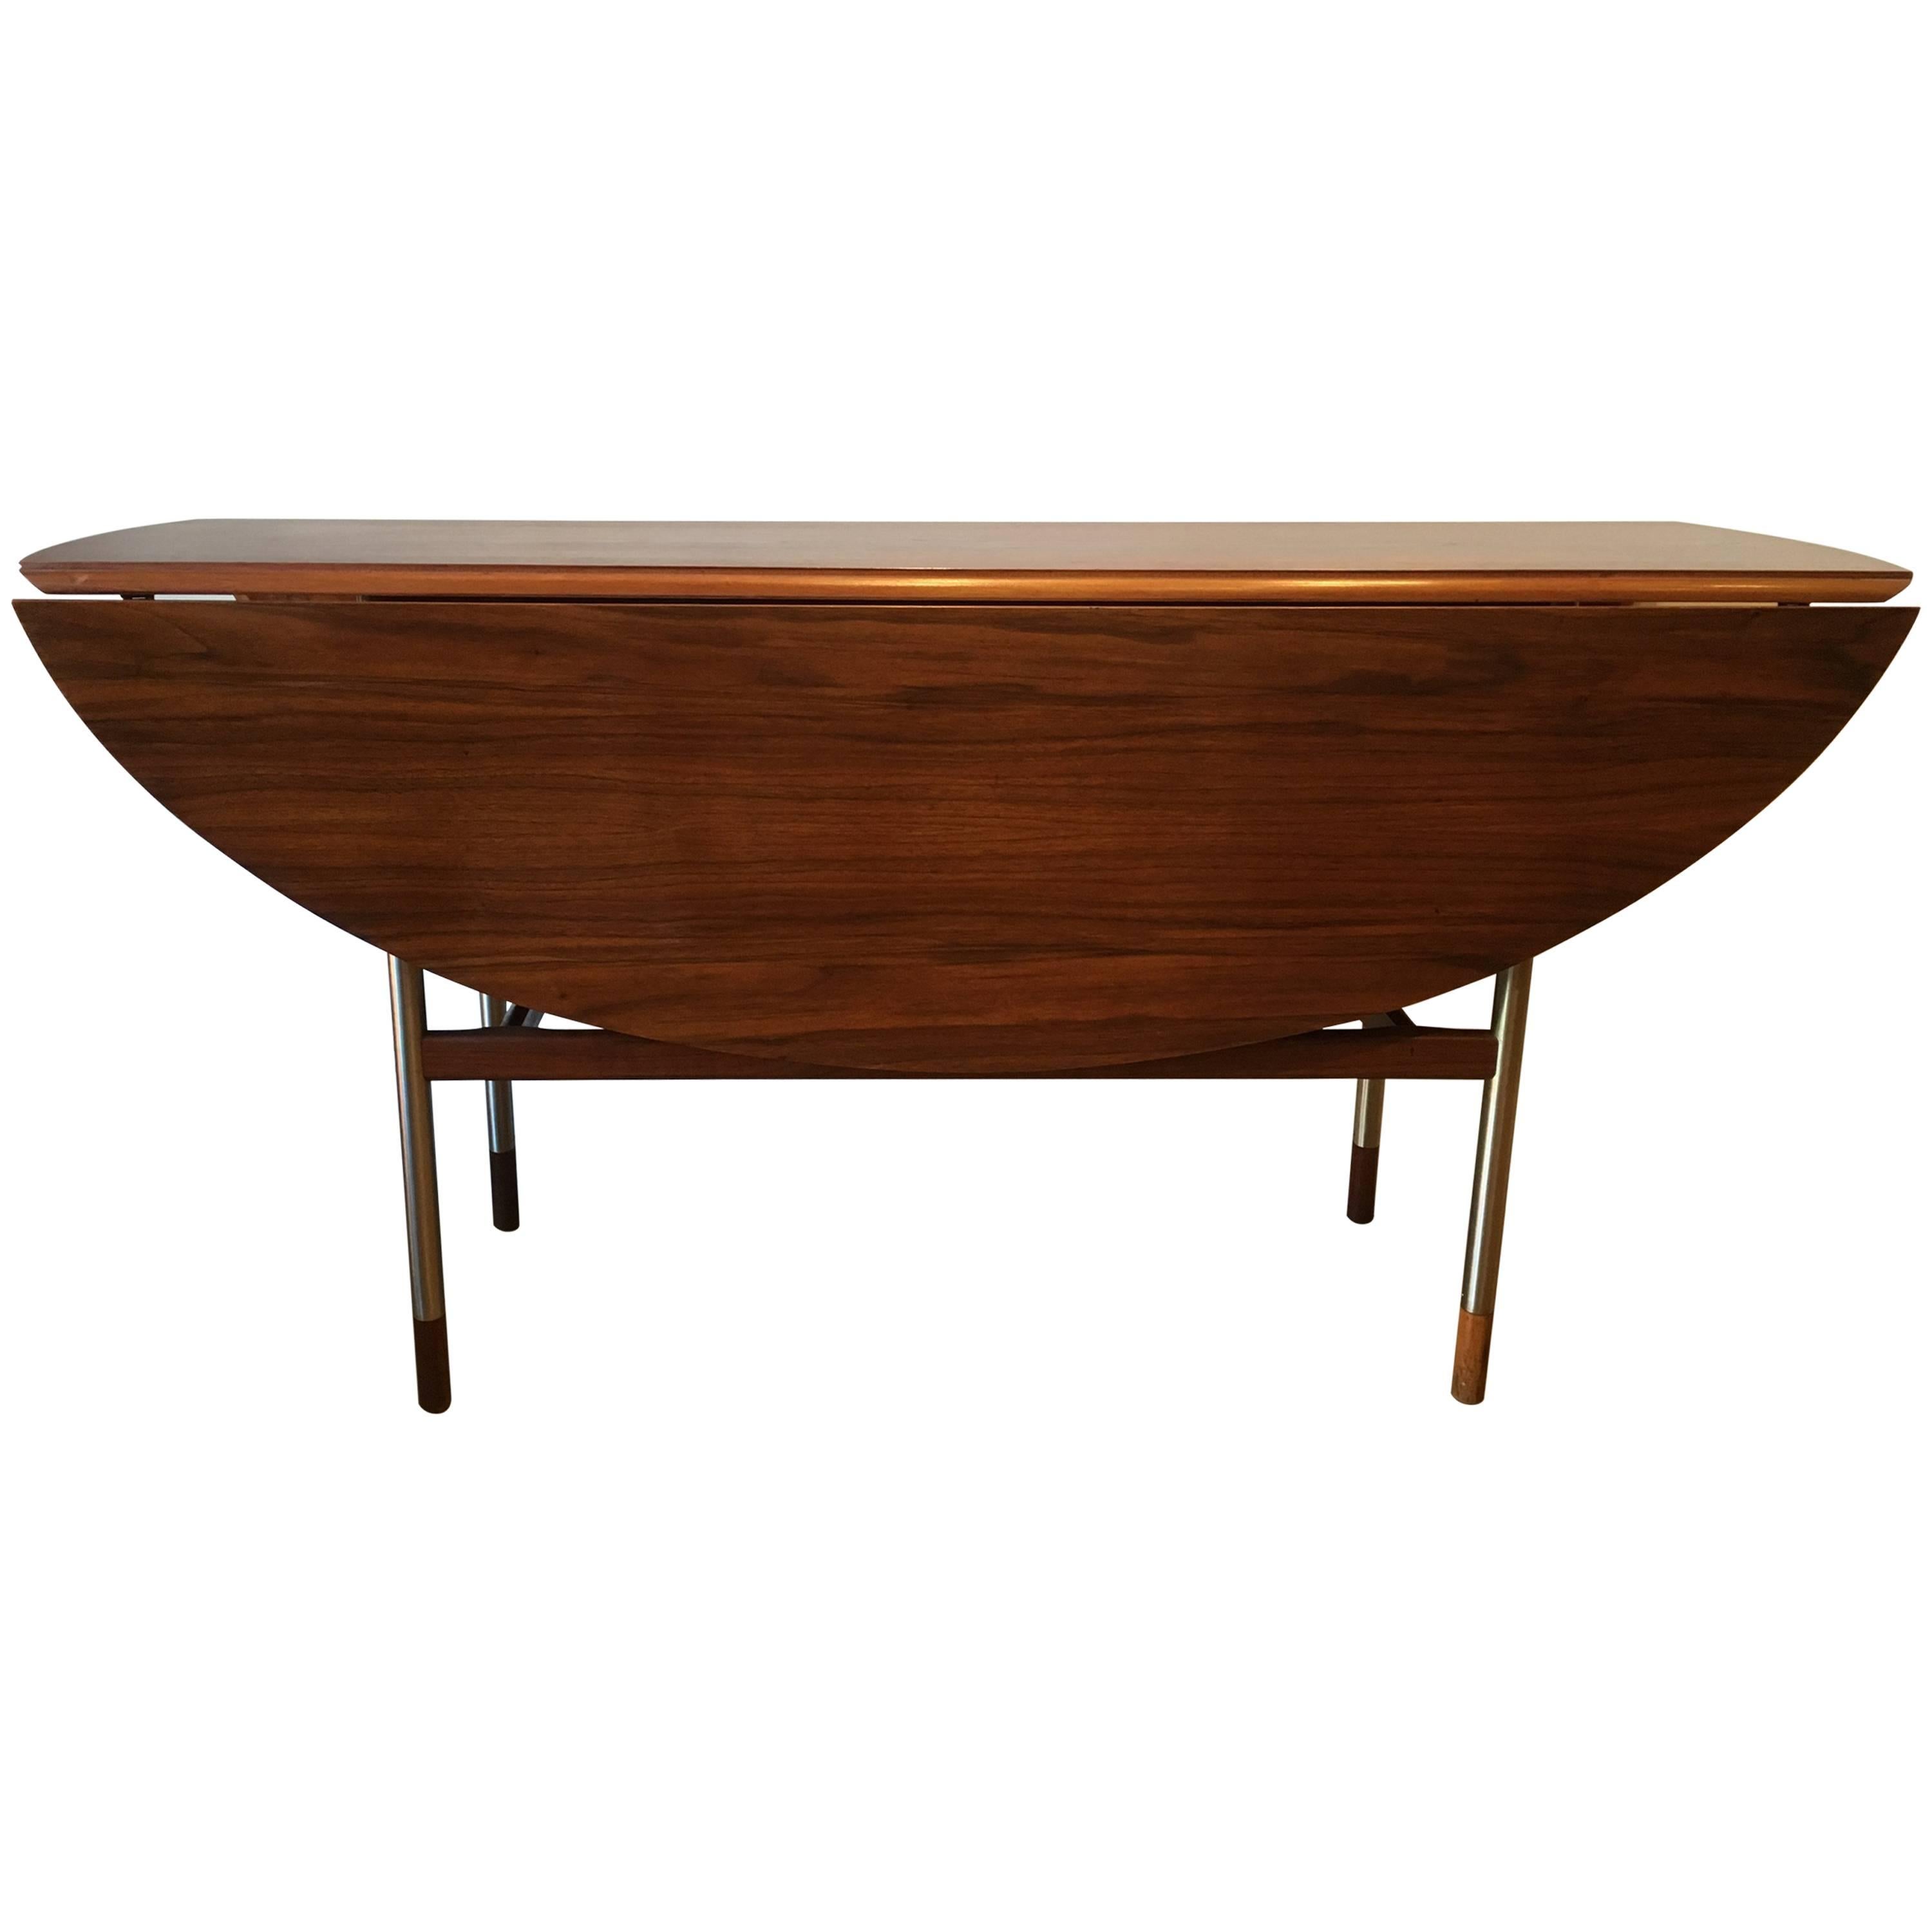 Midcentury Figured Walnut Drop-Leaf Dining or Console Table, circa 1960s